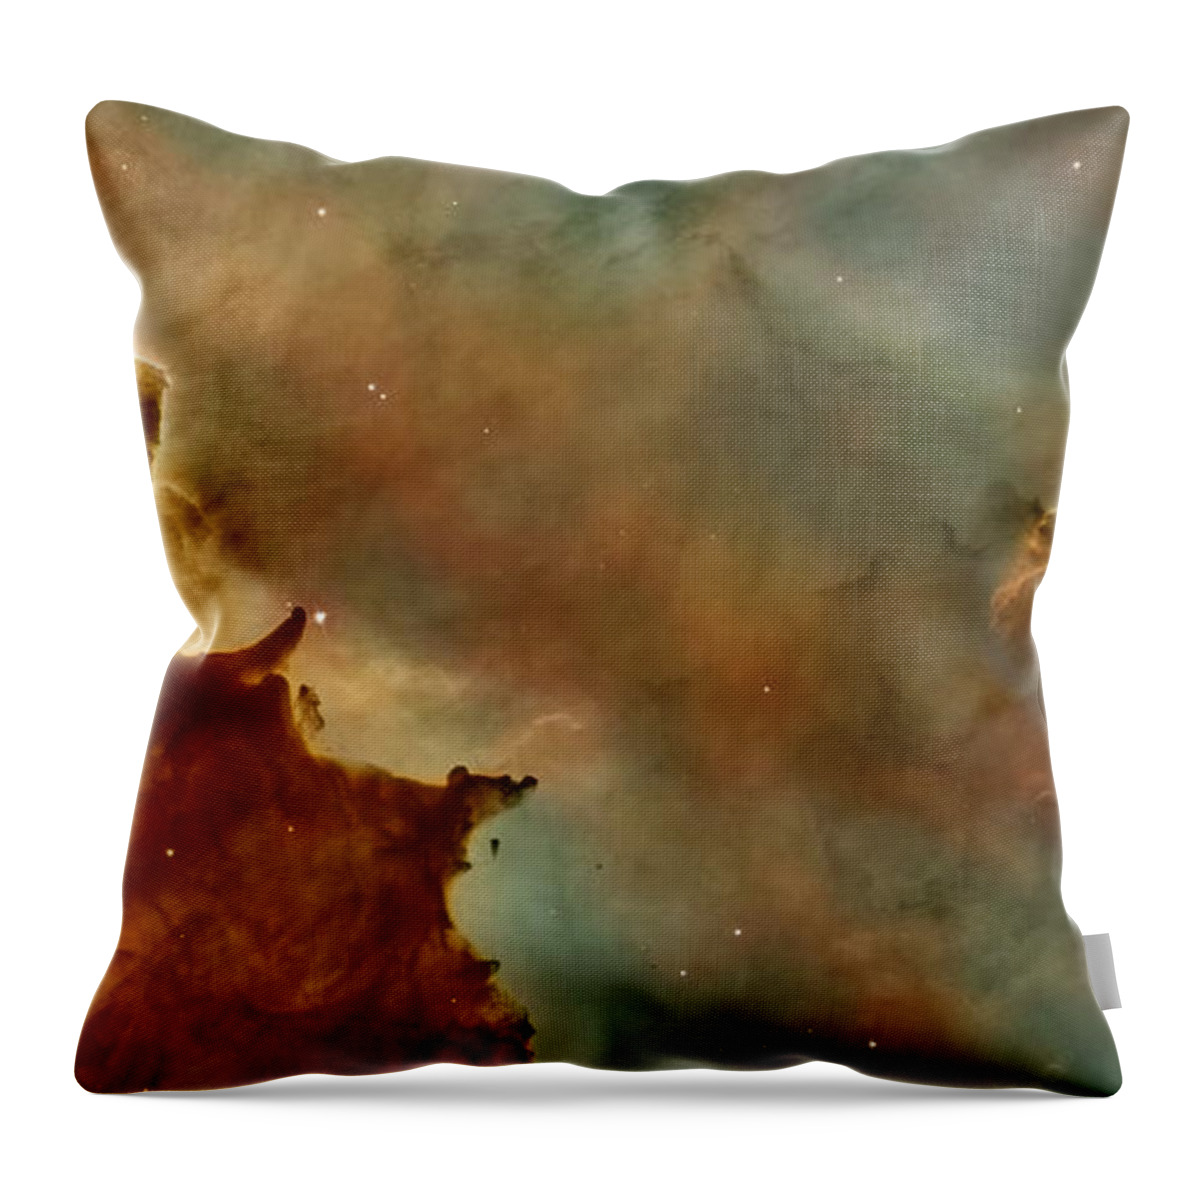 Space Throw Pillow featuring the photograph Carina Nebula Details - Great Clouds by Mark Kiver